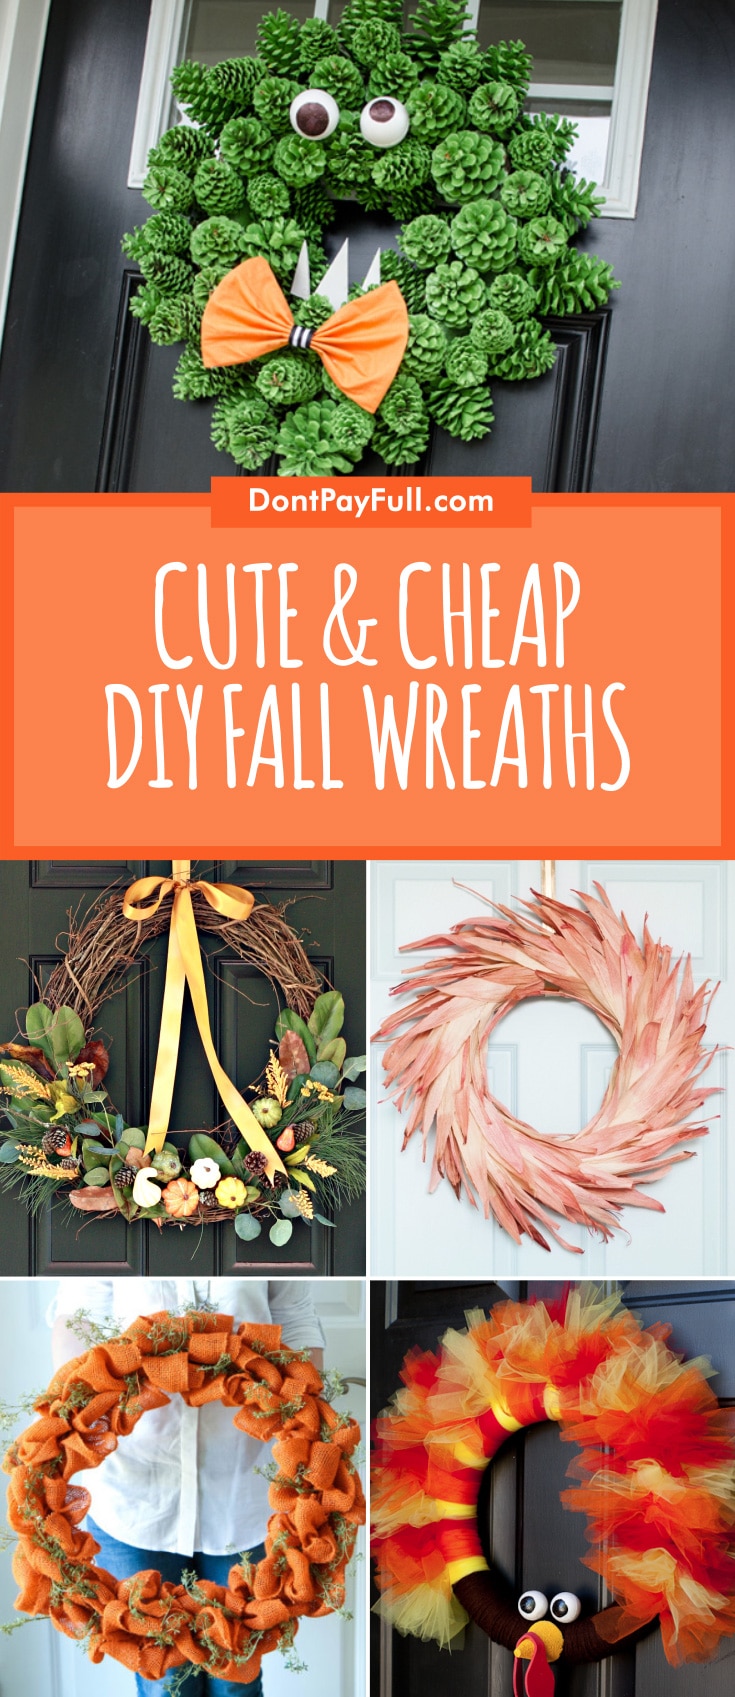 Don't spend a fortune on buying ready-made seasonal wreaths at the store. This collection of beautiful DIY Fall Wreaths are cheap and easy to make at home.